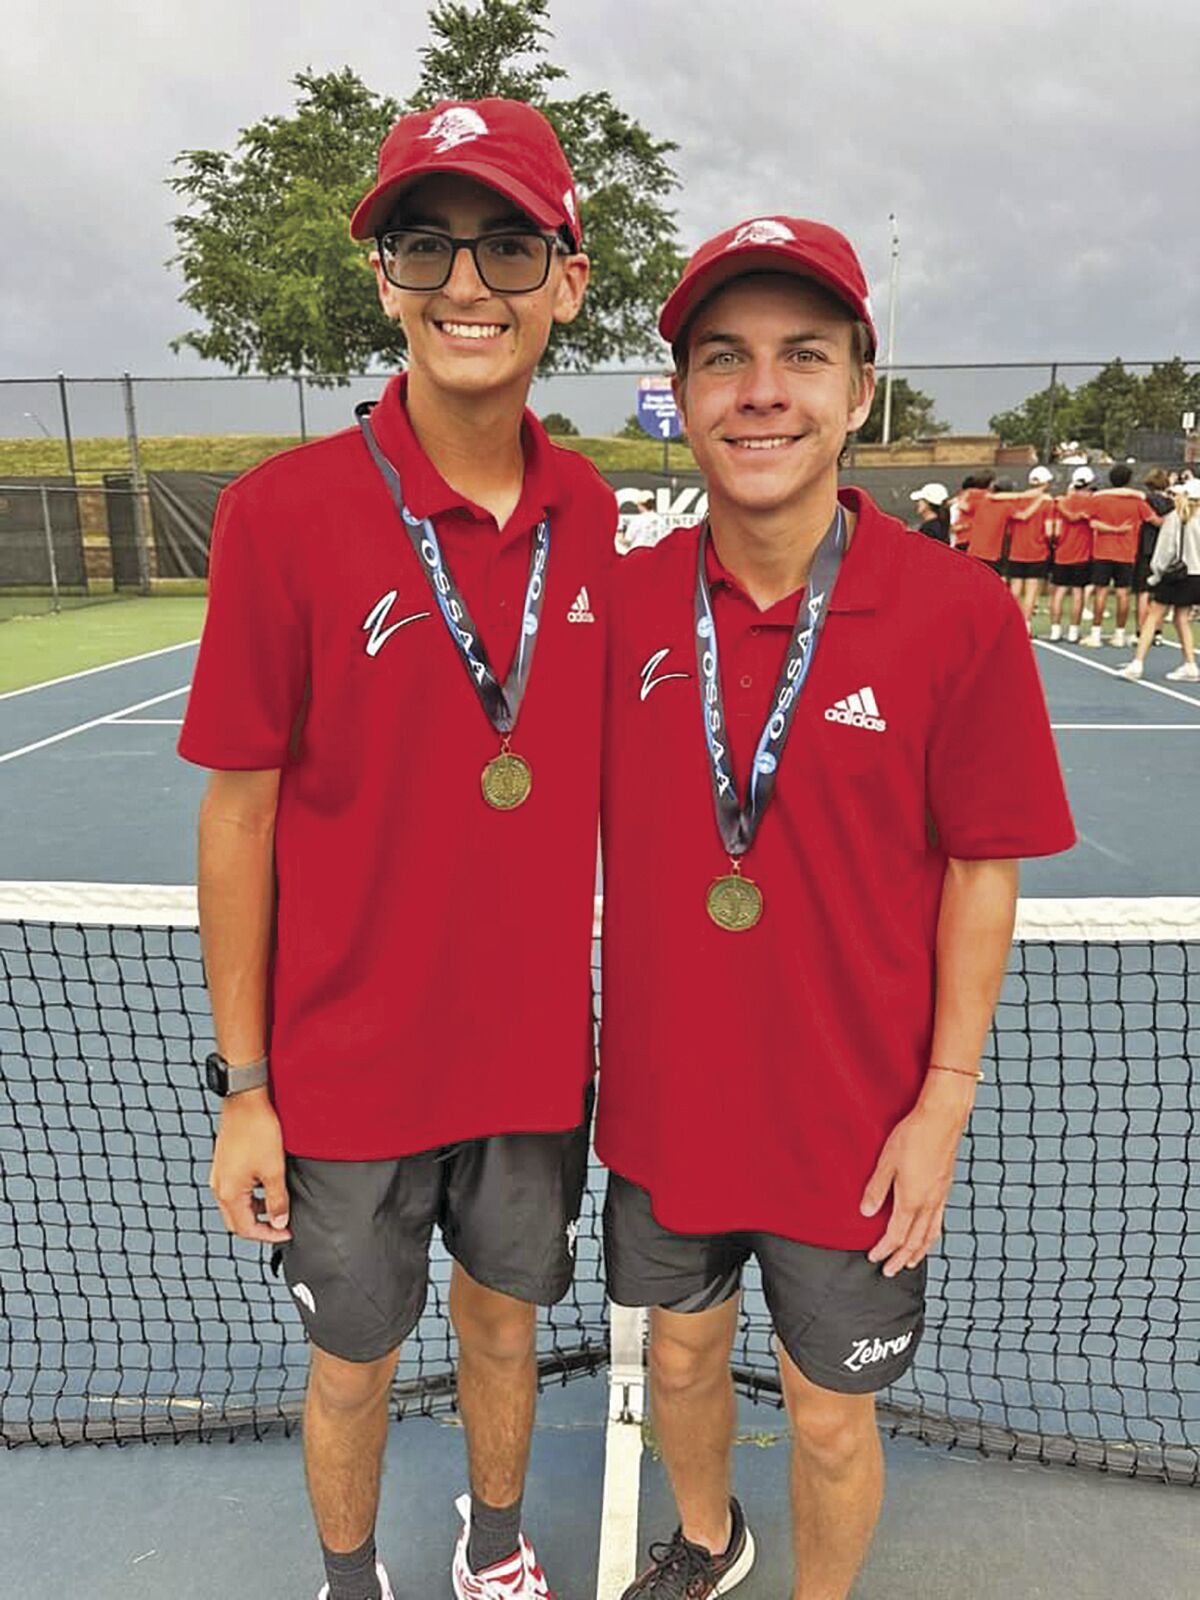 Claremore Players Shine with 5th Place Finish in State Tennis Tournaments